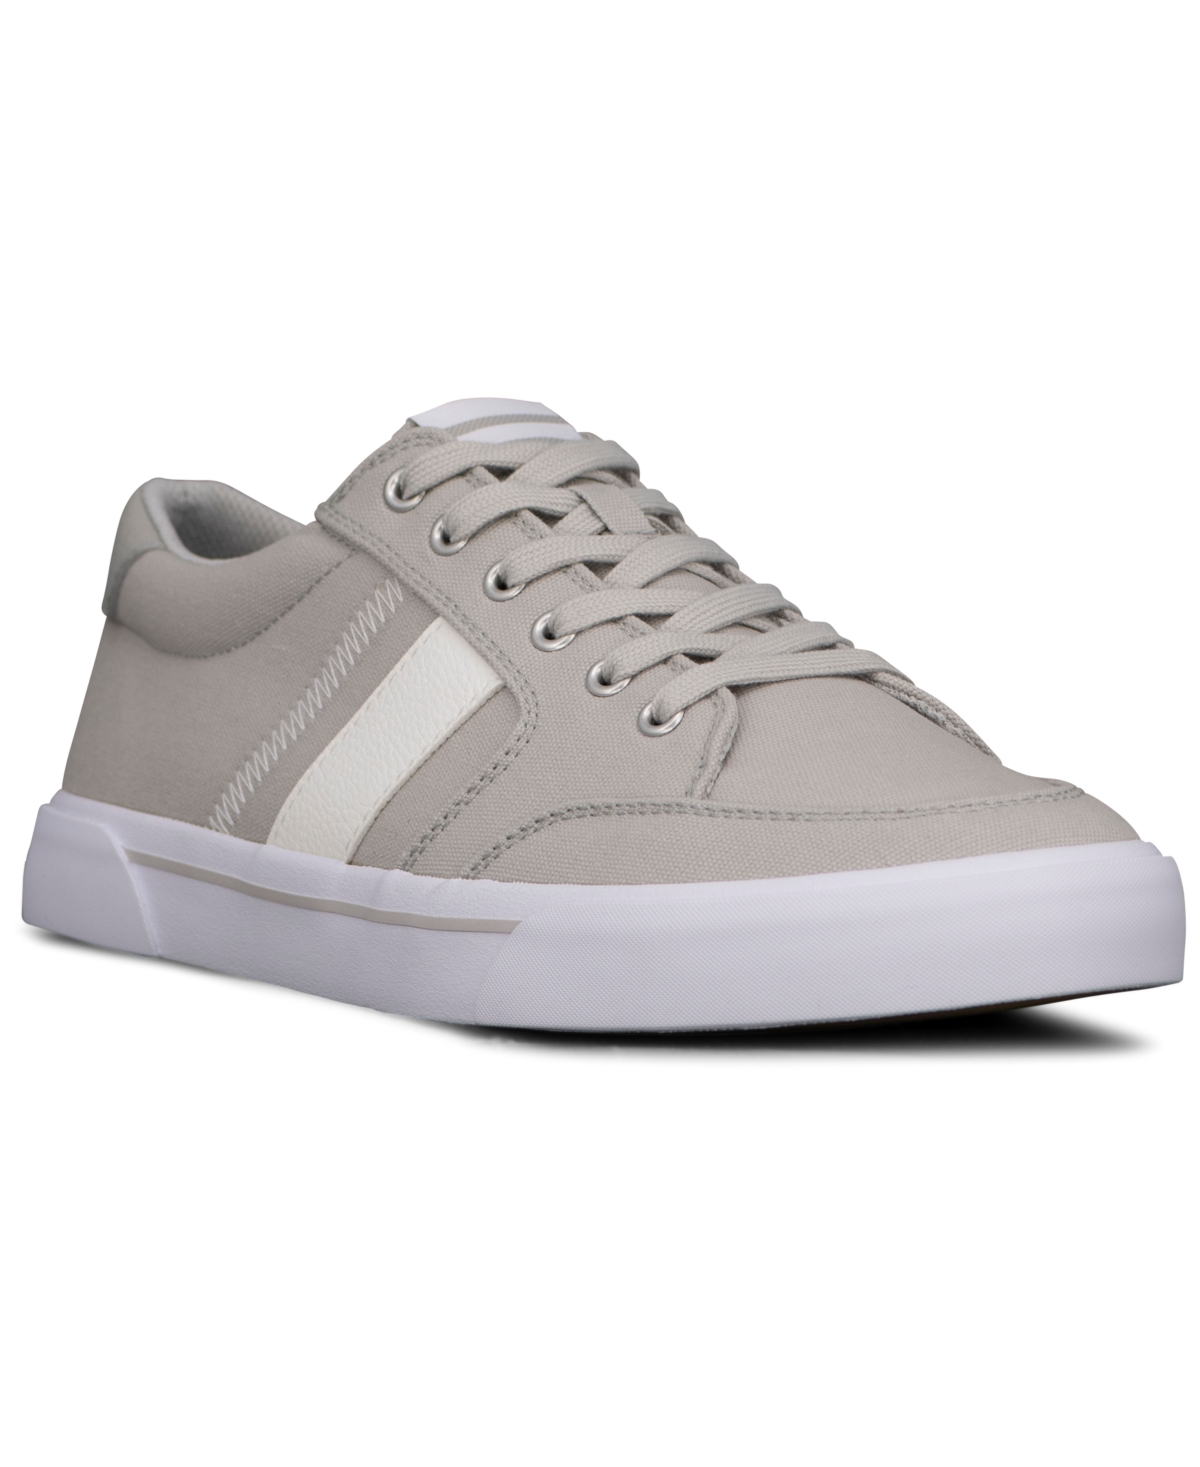 Shop Ben Sherman Men's Hawthorn Low Canvas Casual Sneakers From Finish Line In Grey,white